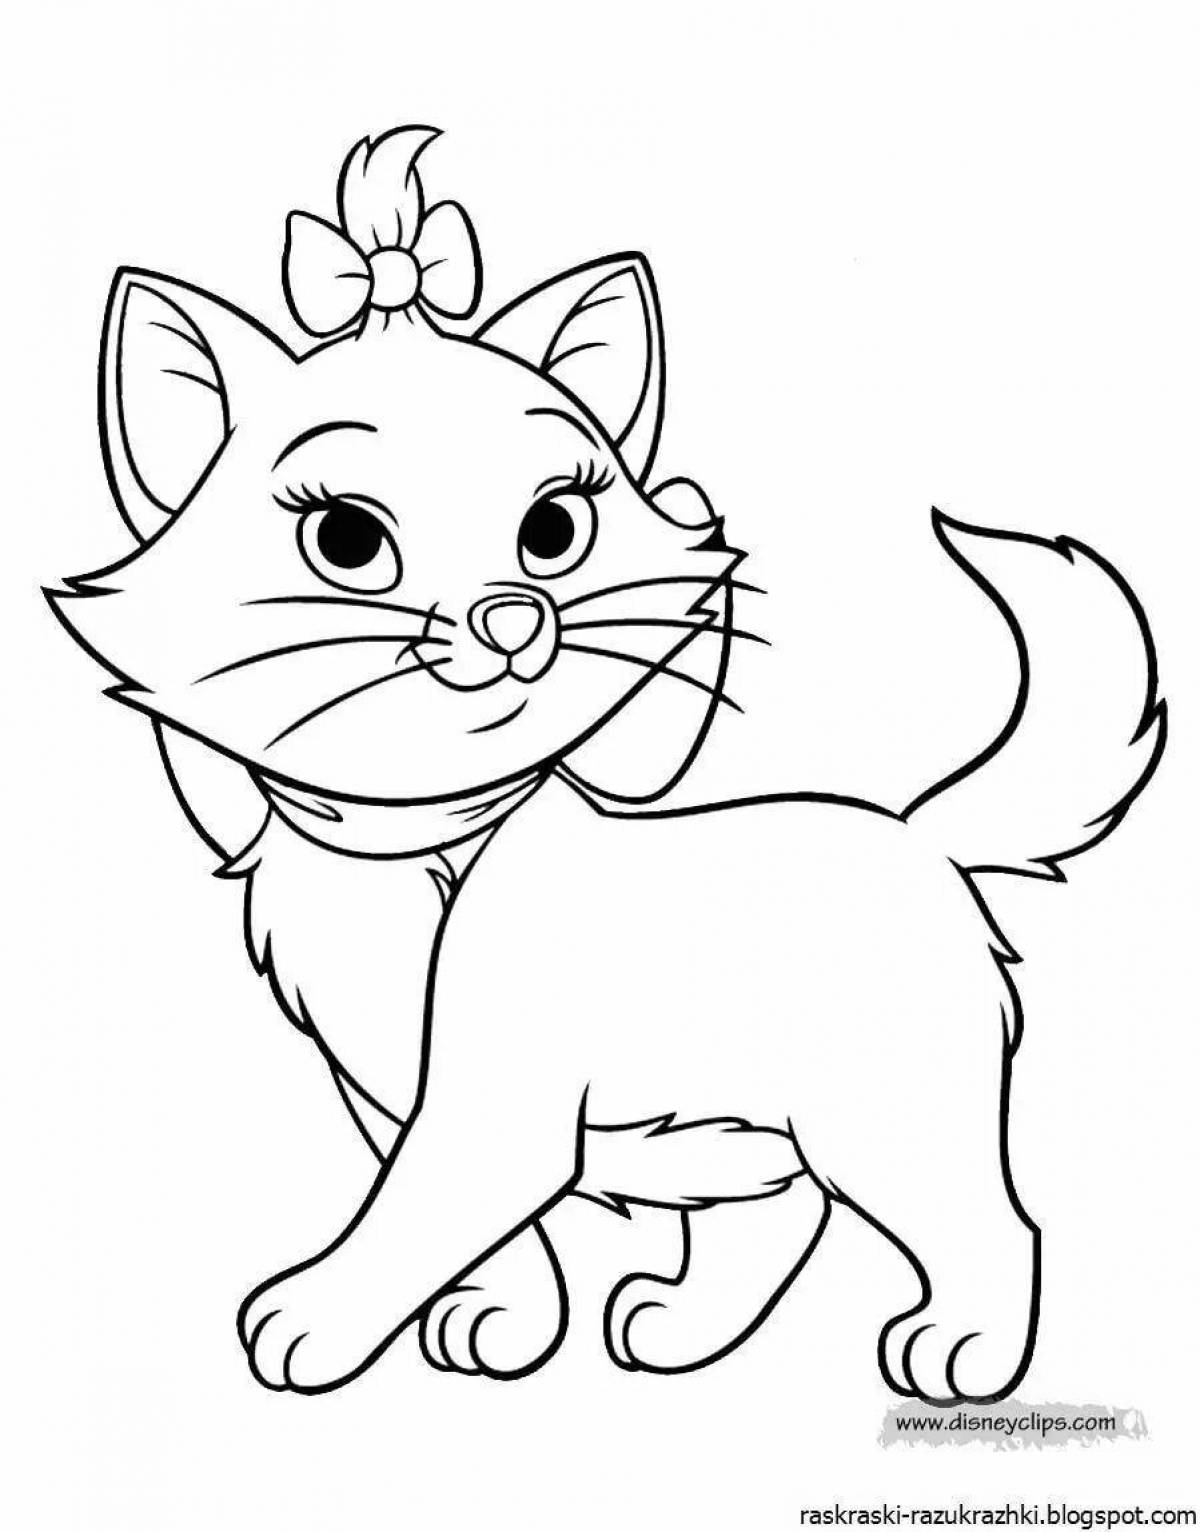 Fun coloring book for girls 7 years old cats